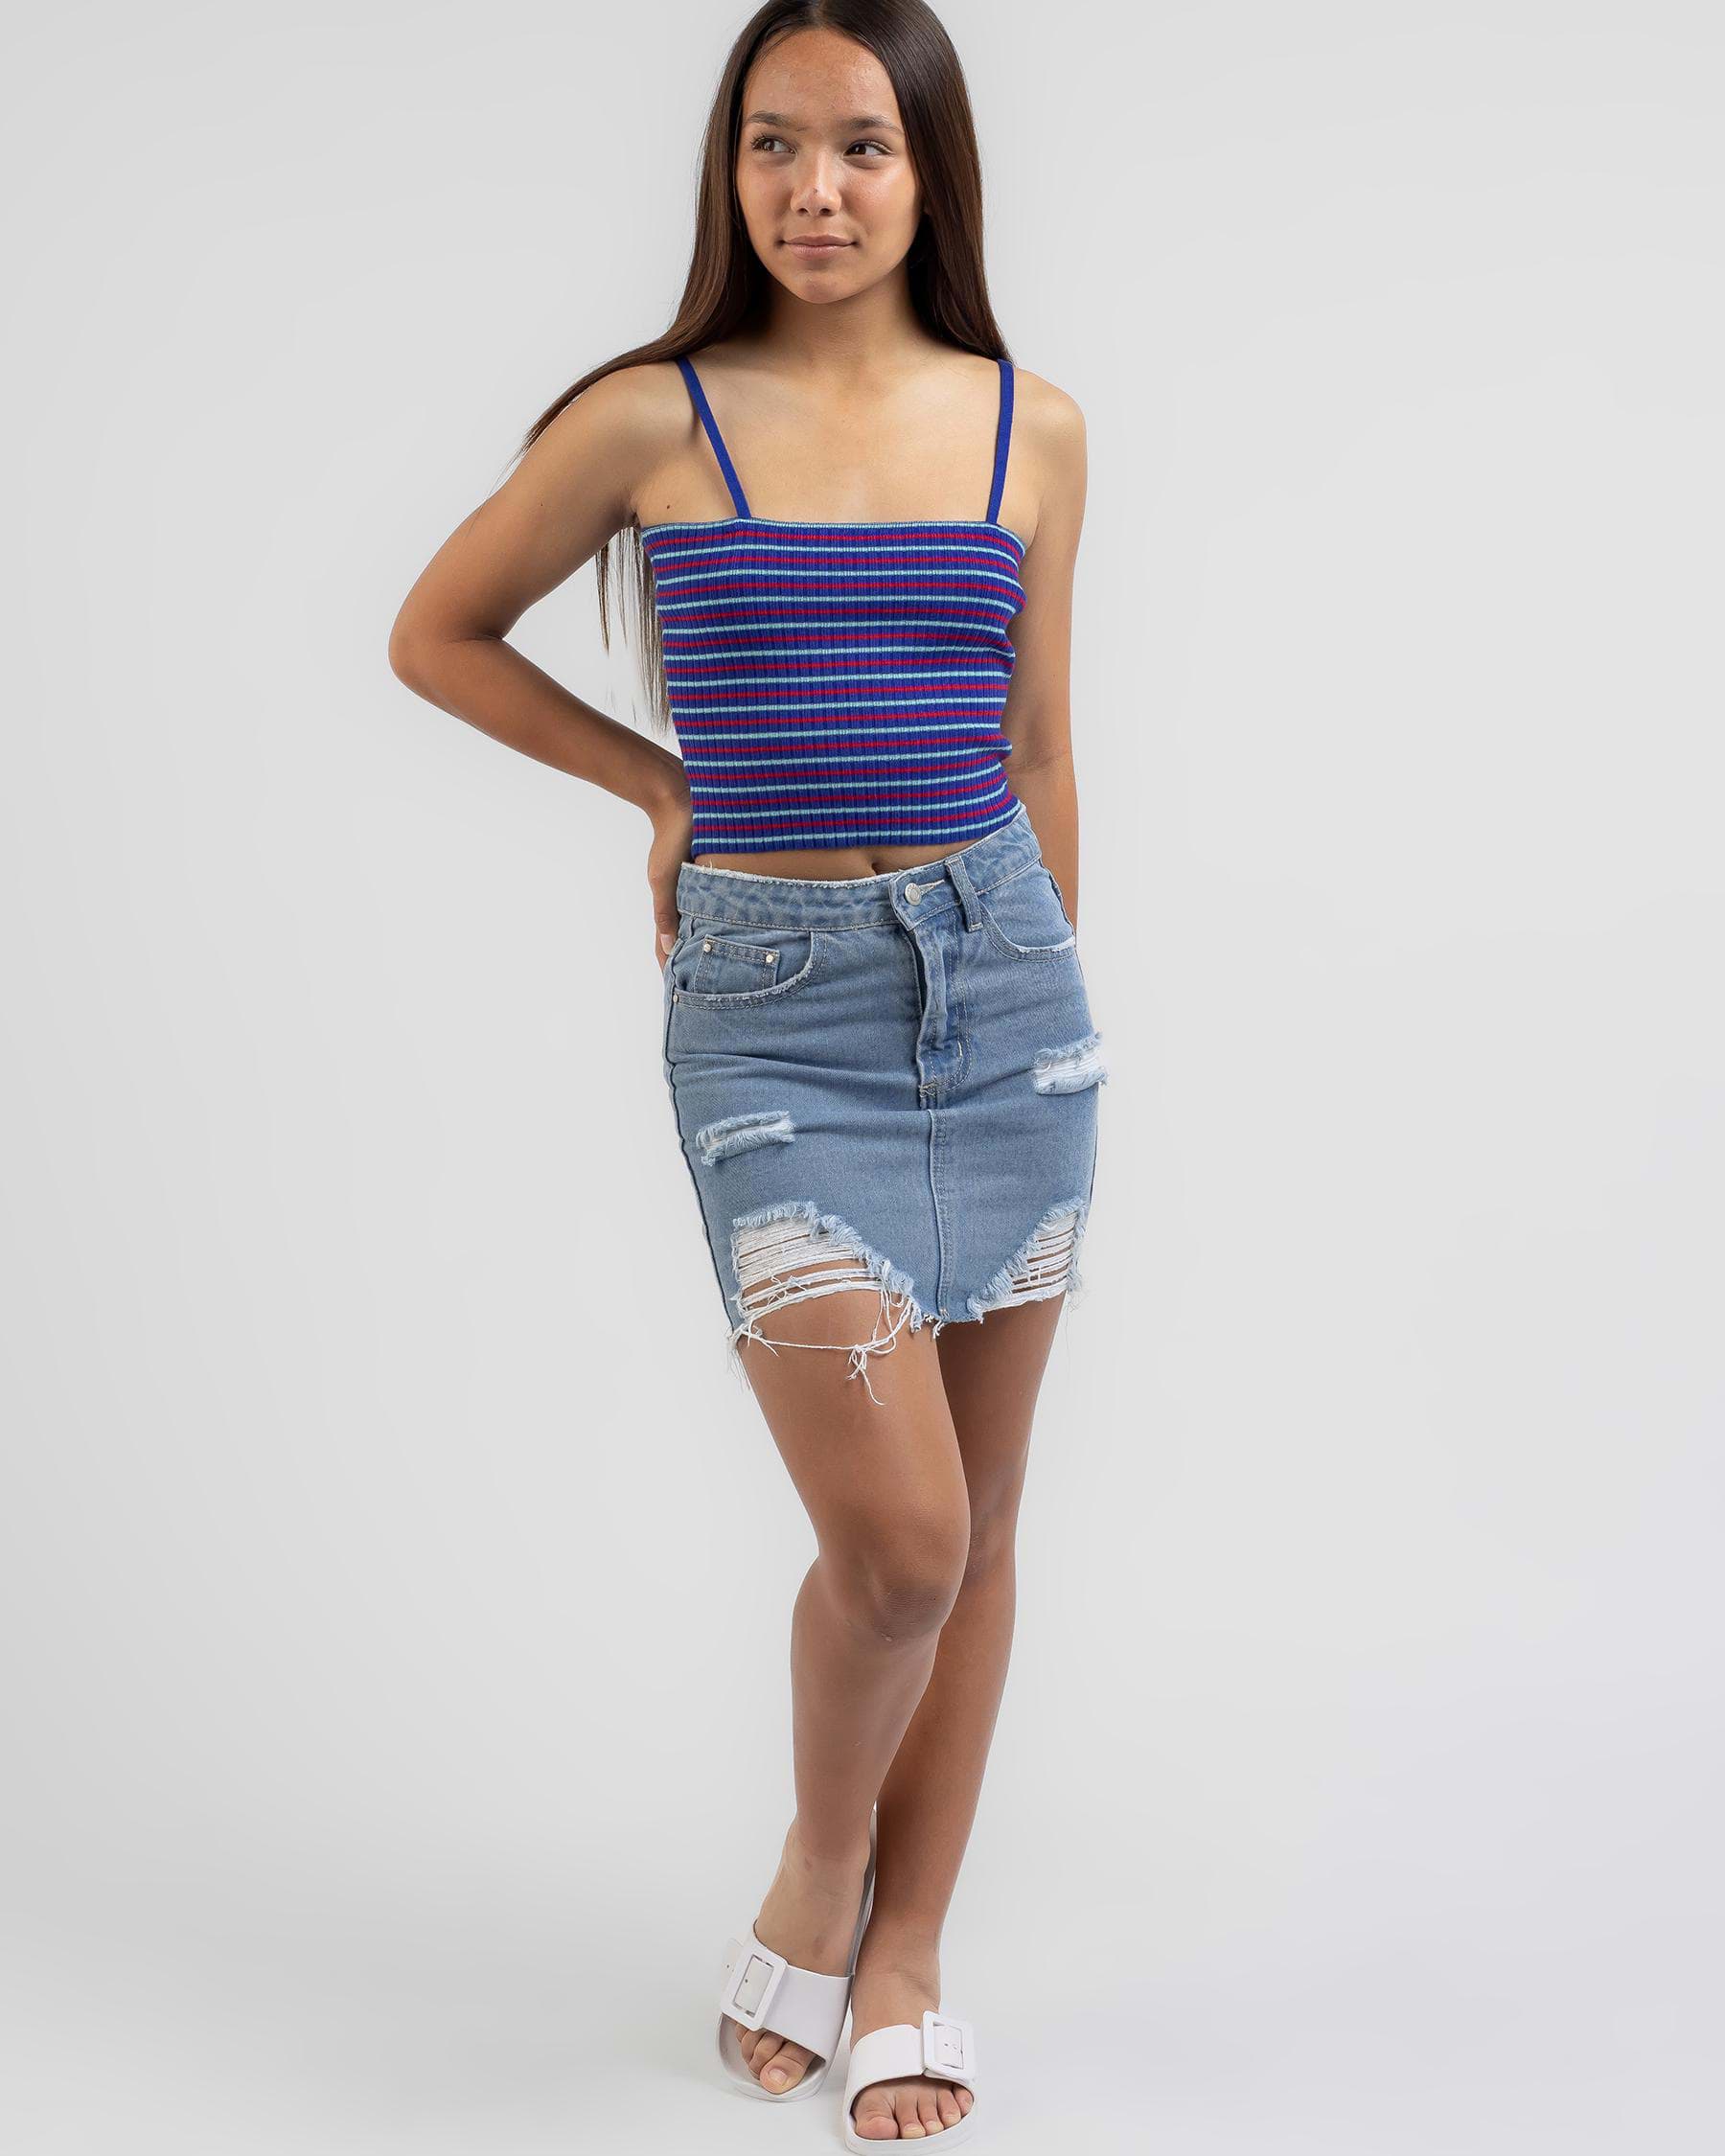 Ava And Ever Girls' Retro Stripe Top In Blue/red - Fast Shipping & Easy ...